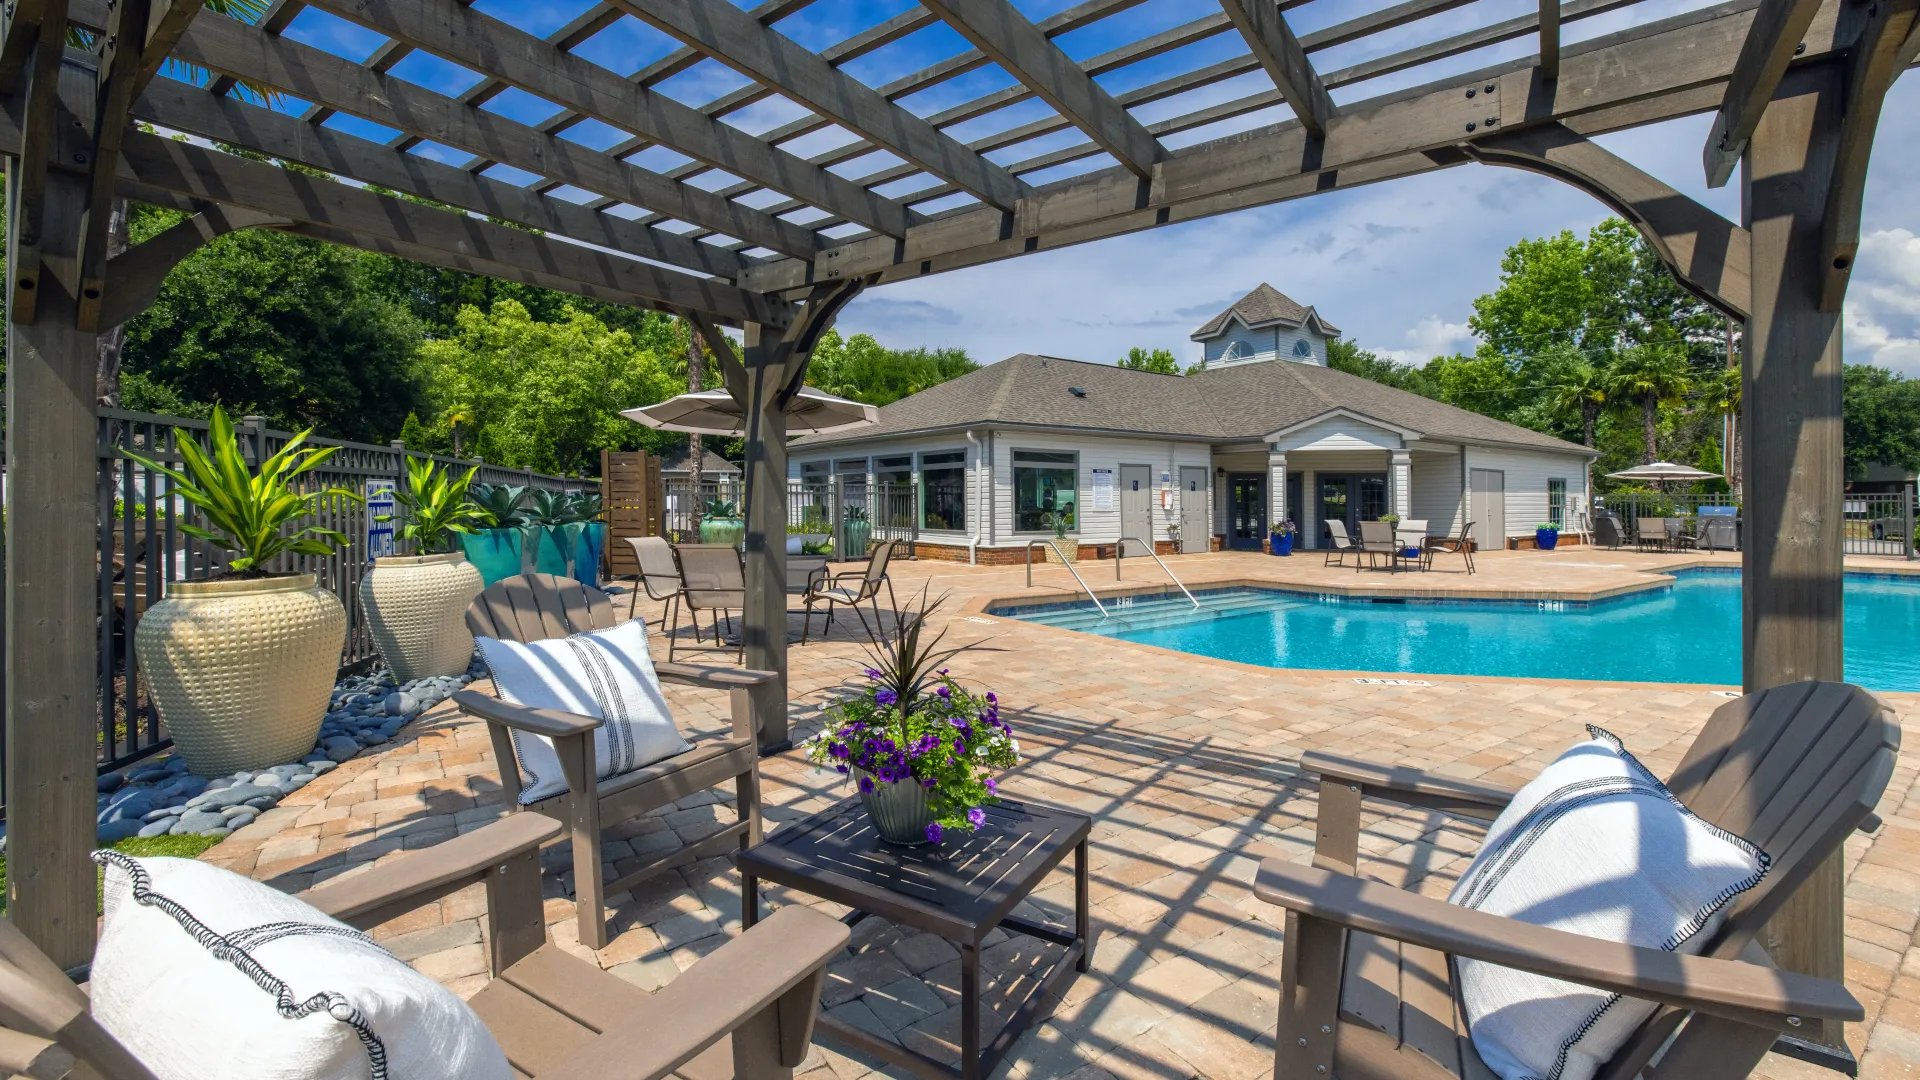 Adirondack seating beneath an elegant pergola offers a prime spot to enjoy the pool and lake's ambiance.